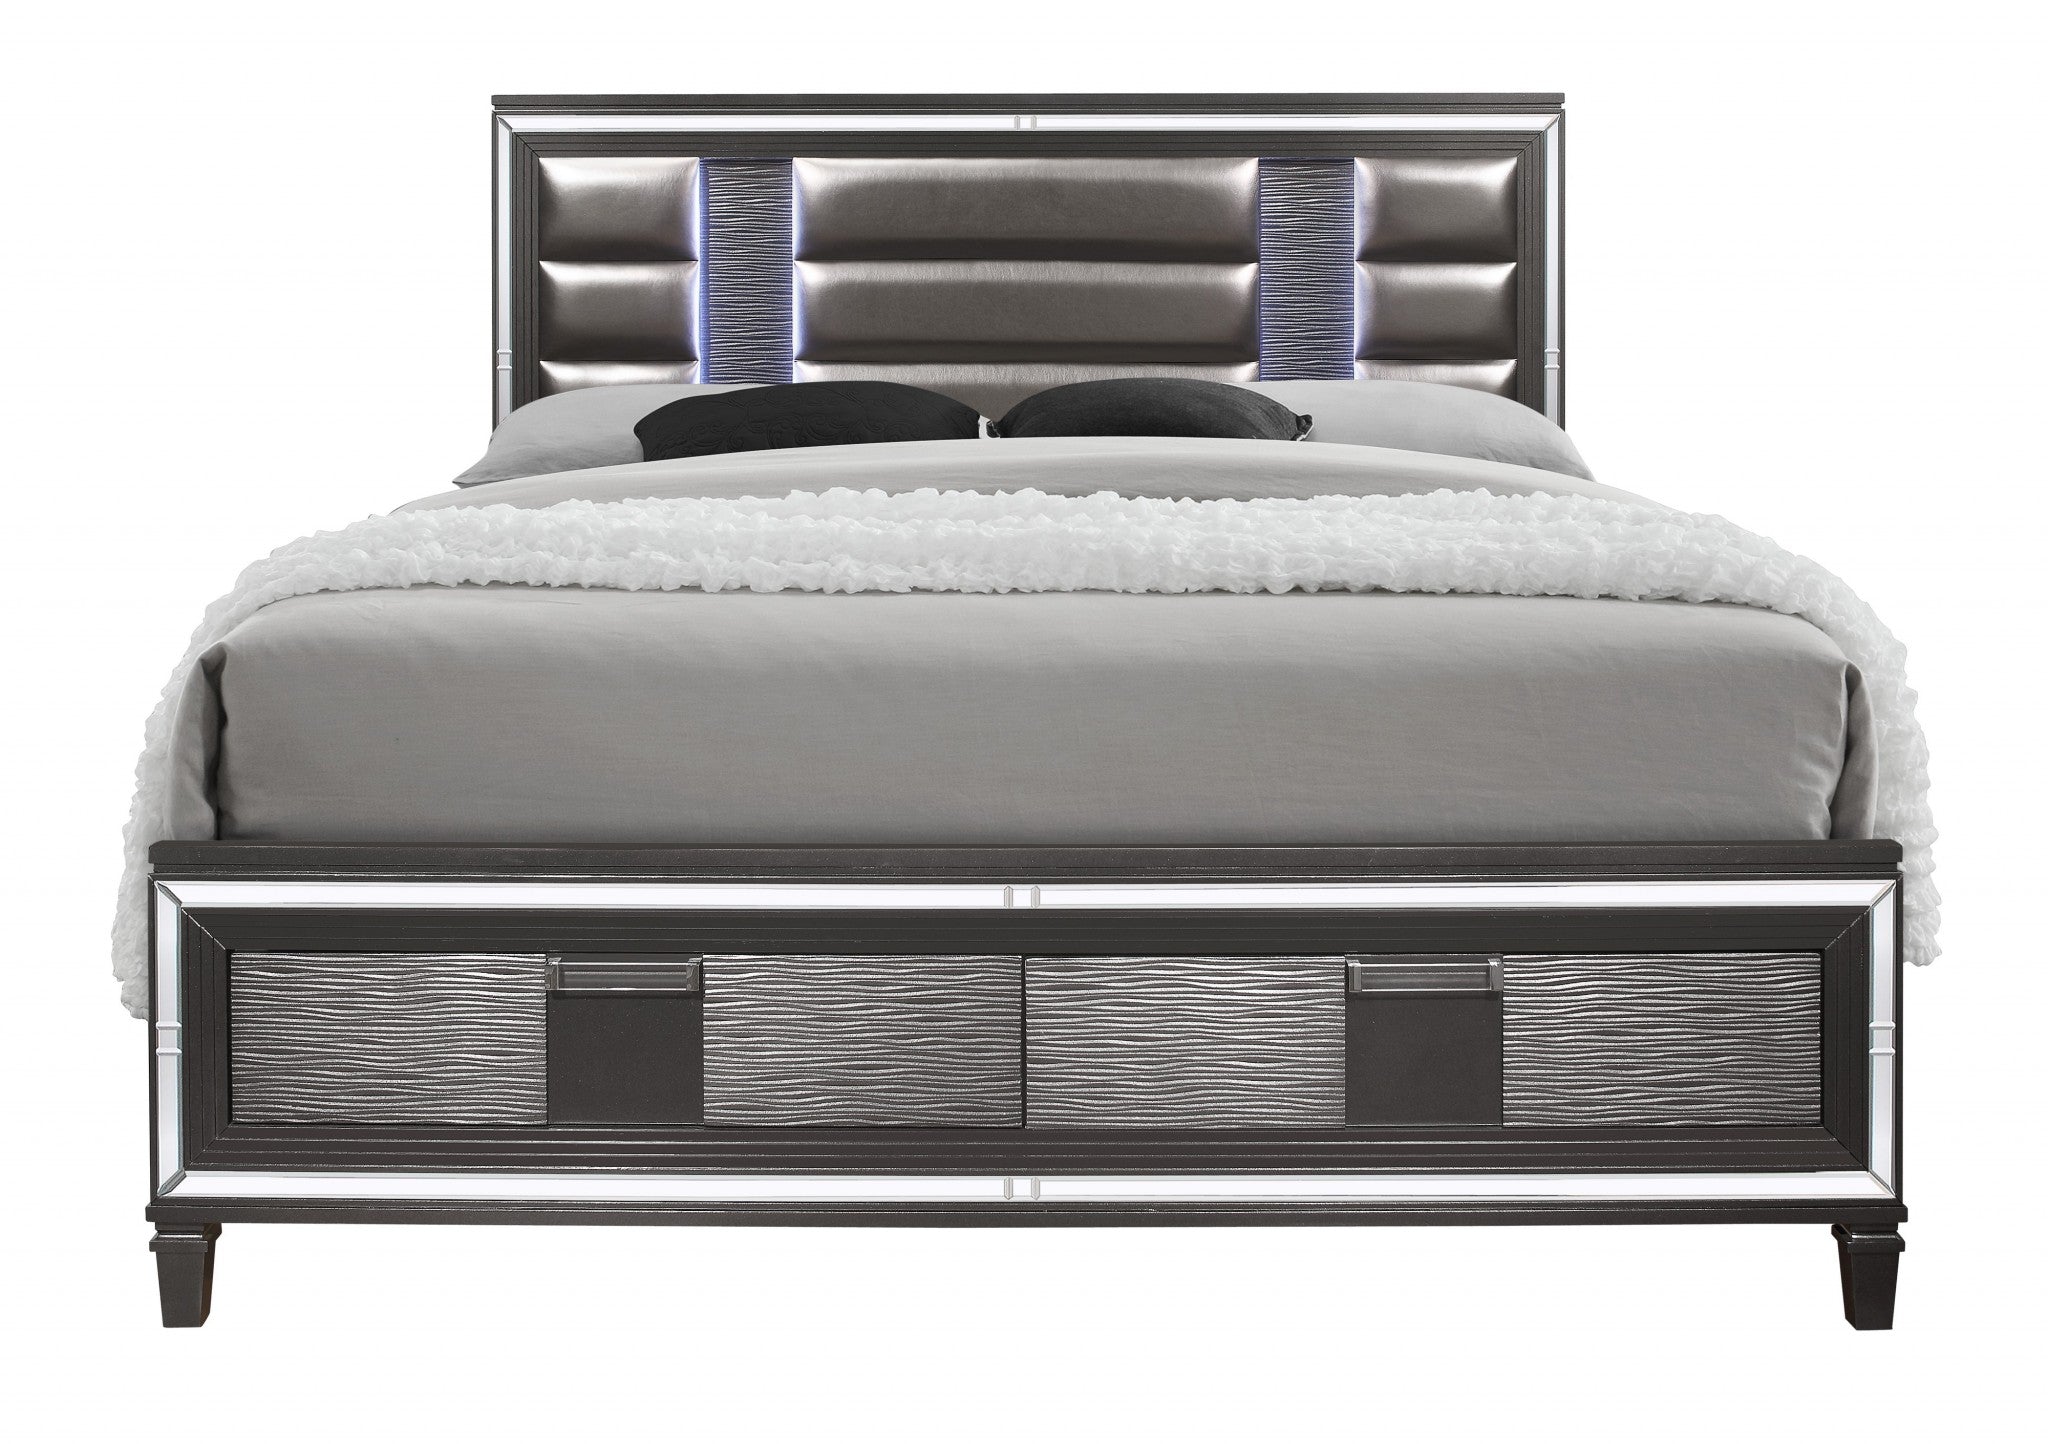 Majestic Metallic Grey Queen Bed with LED Lightning Upholstered Headboard  2 Footboard Drawer